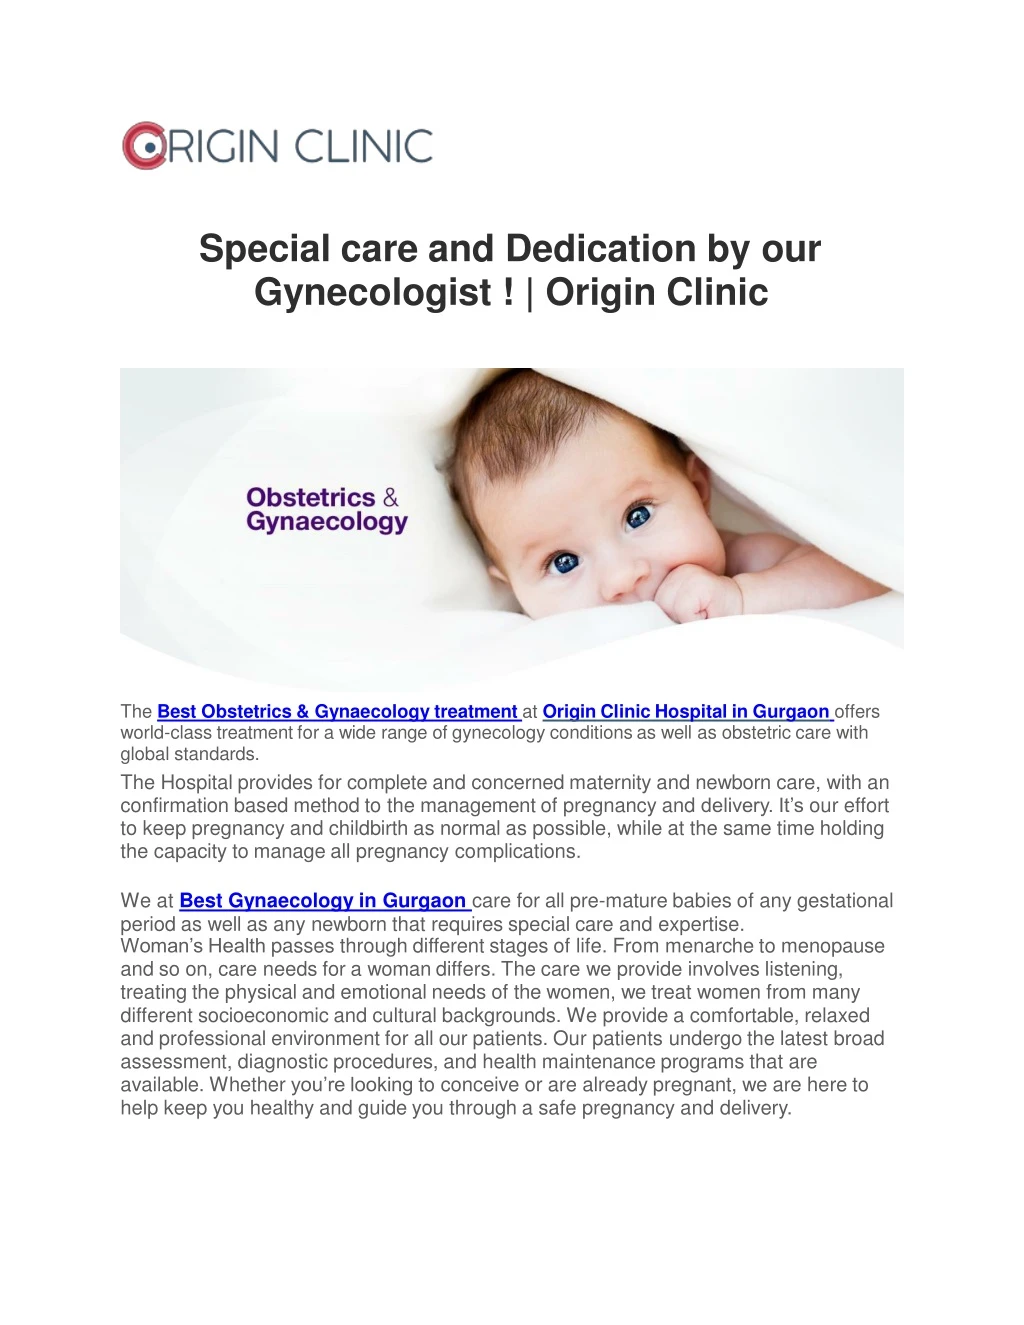 special care and dedication by our gynecologist origin clinic